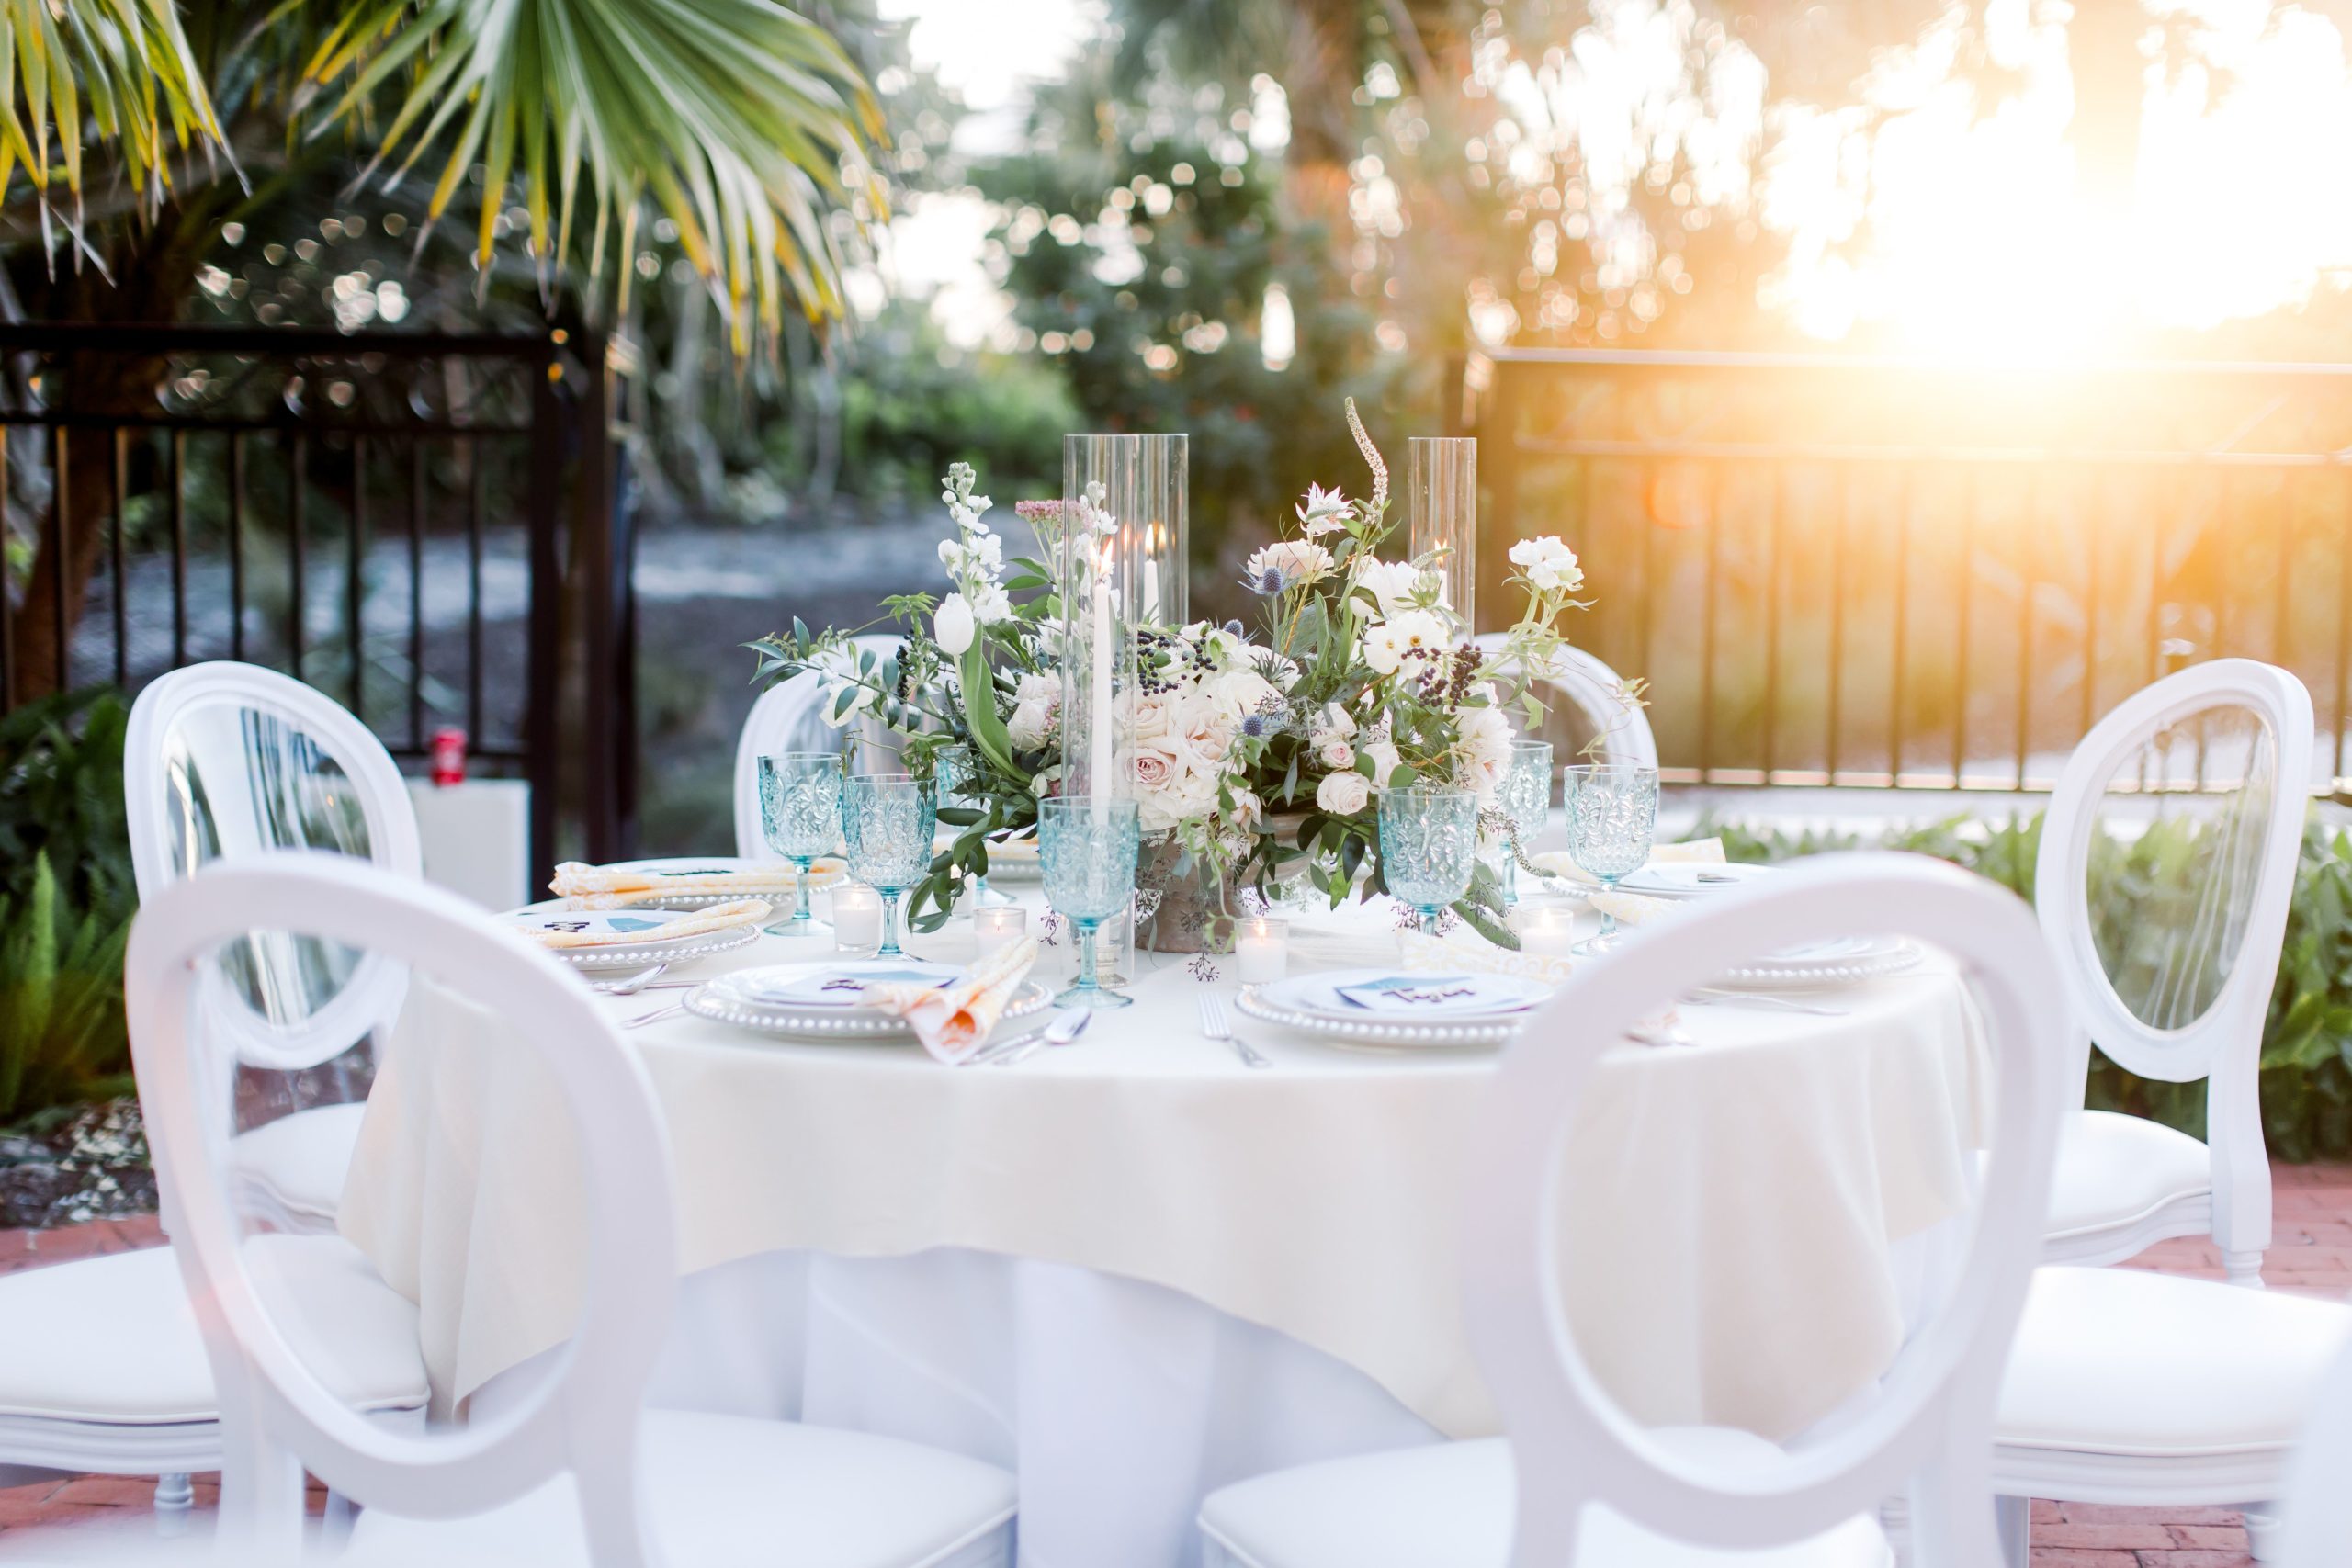 Wedding Dining at Sunset with white chairs and white linens featuring glassware and plates near palm trees at the Sea Palms Estate in Captiva Island, FL